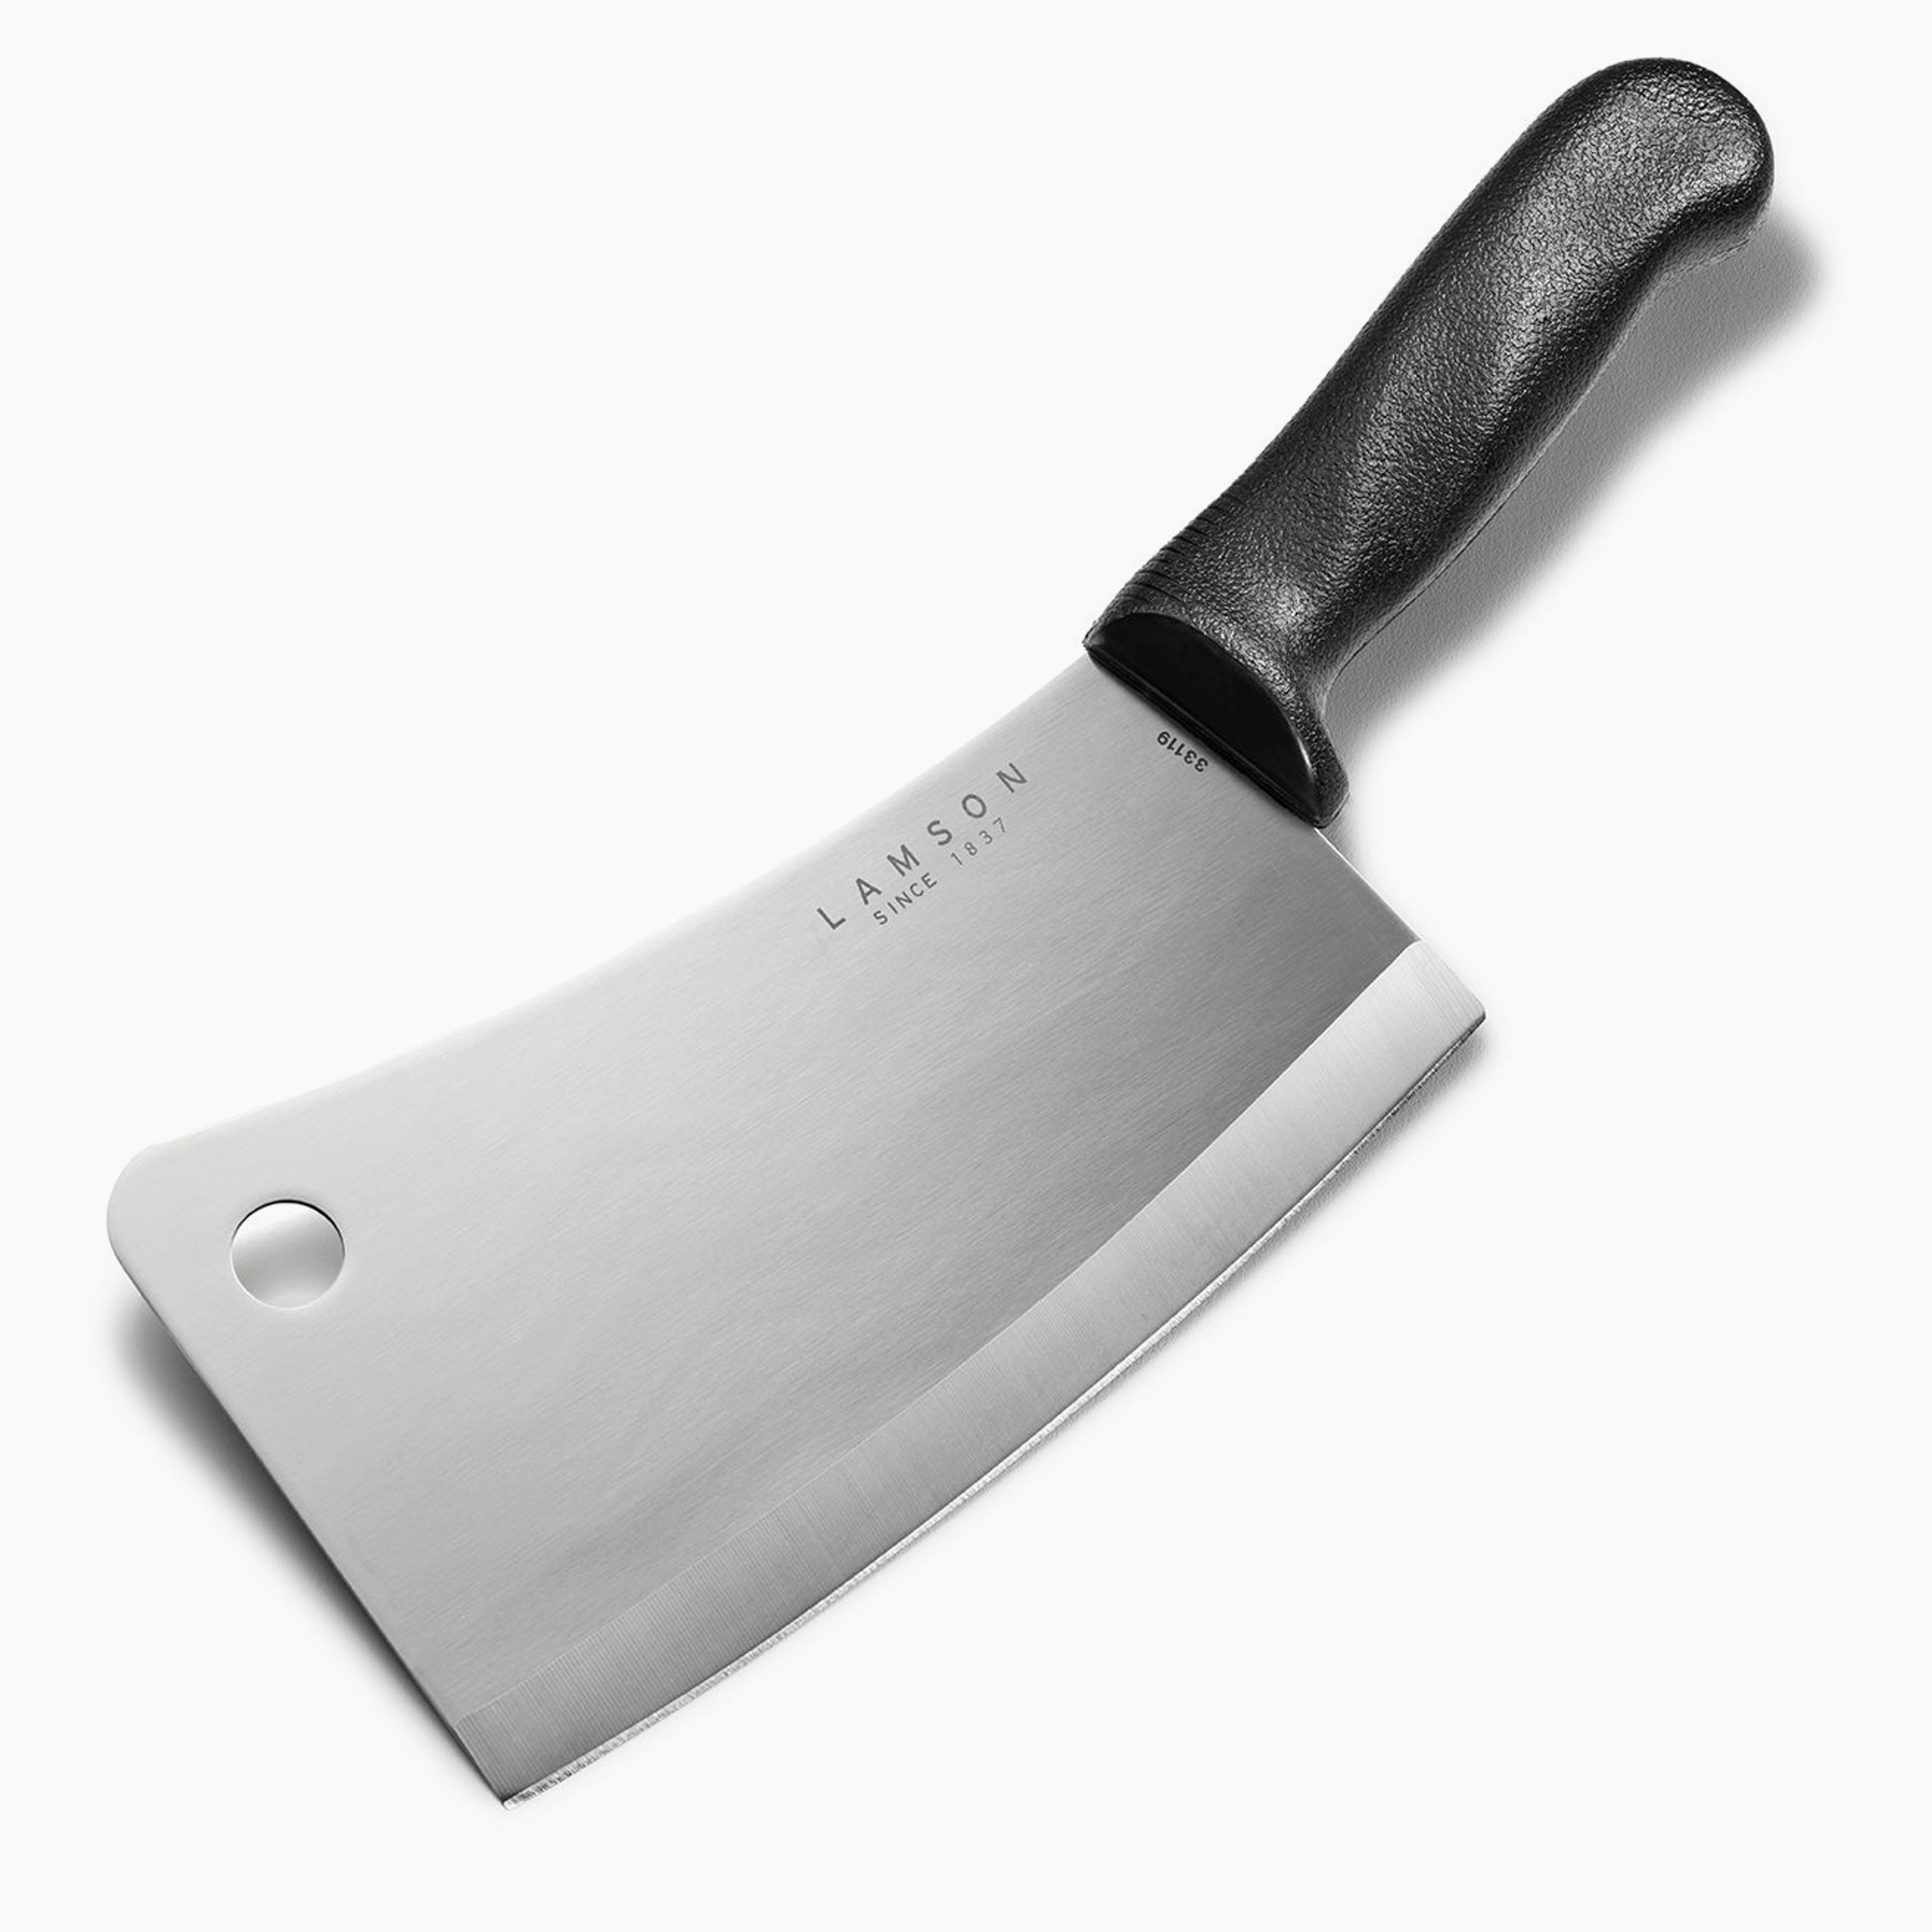 7.25" Meat Cleaver with Polypropylene Handle